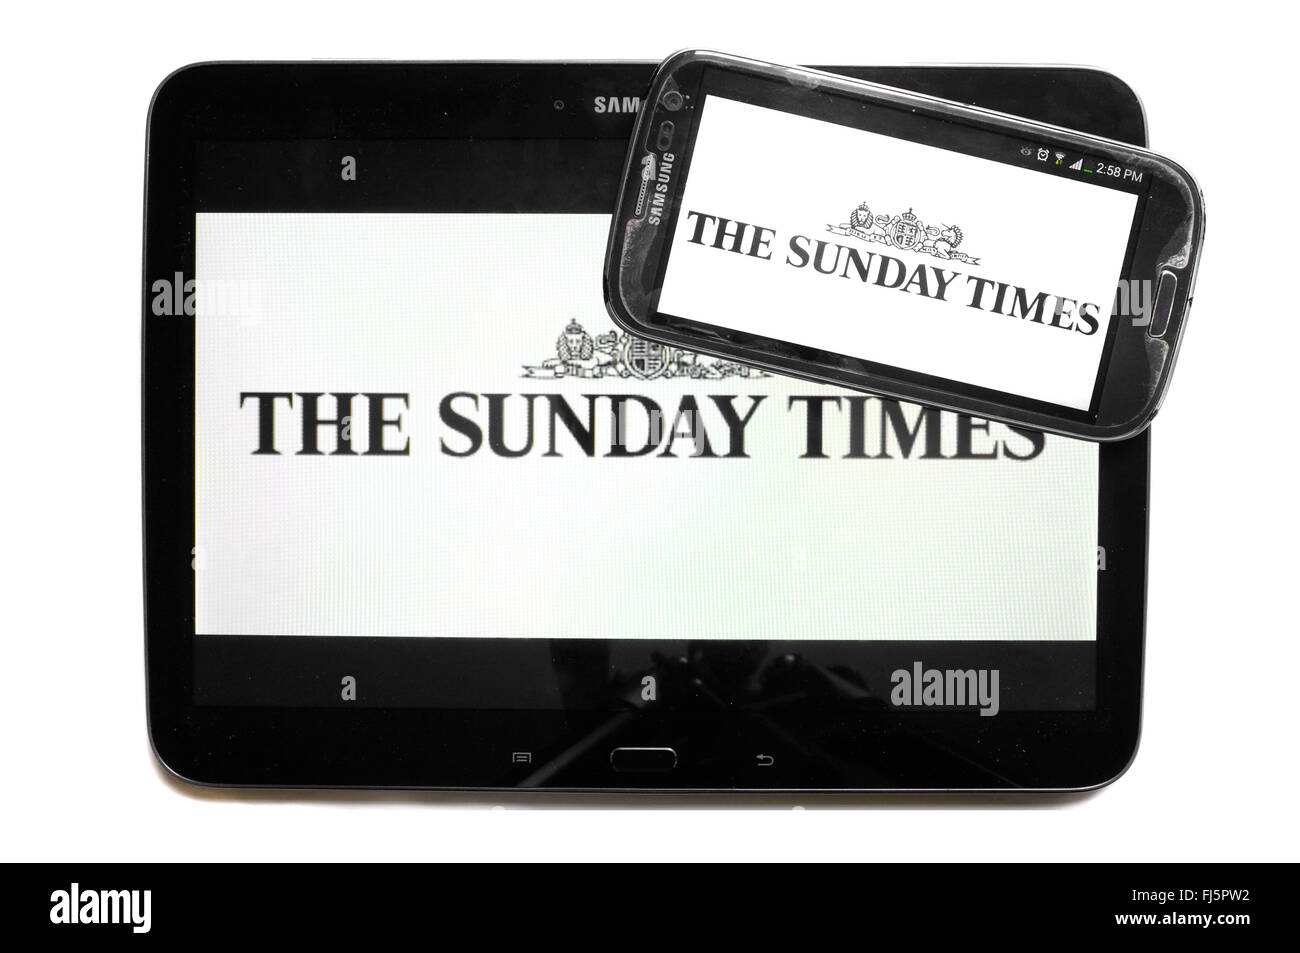 The logo of The Sunday Times newspaper displayed on the screens of a tablet and a smartphone. Stock Photo